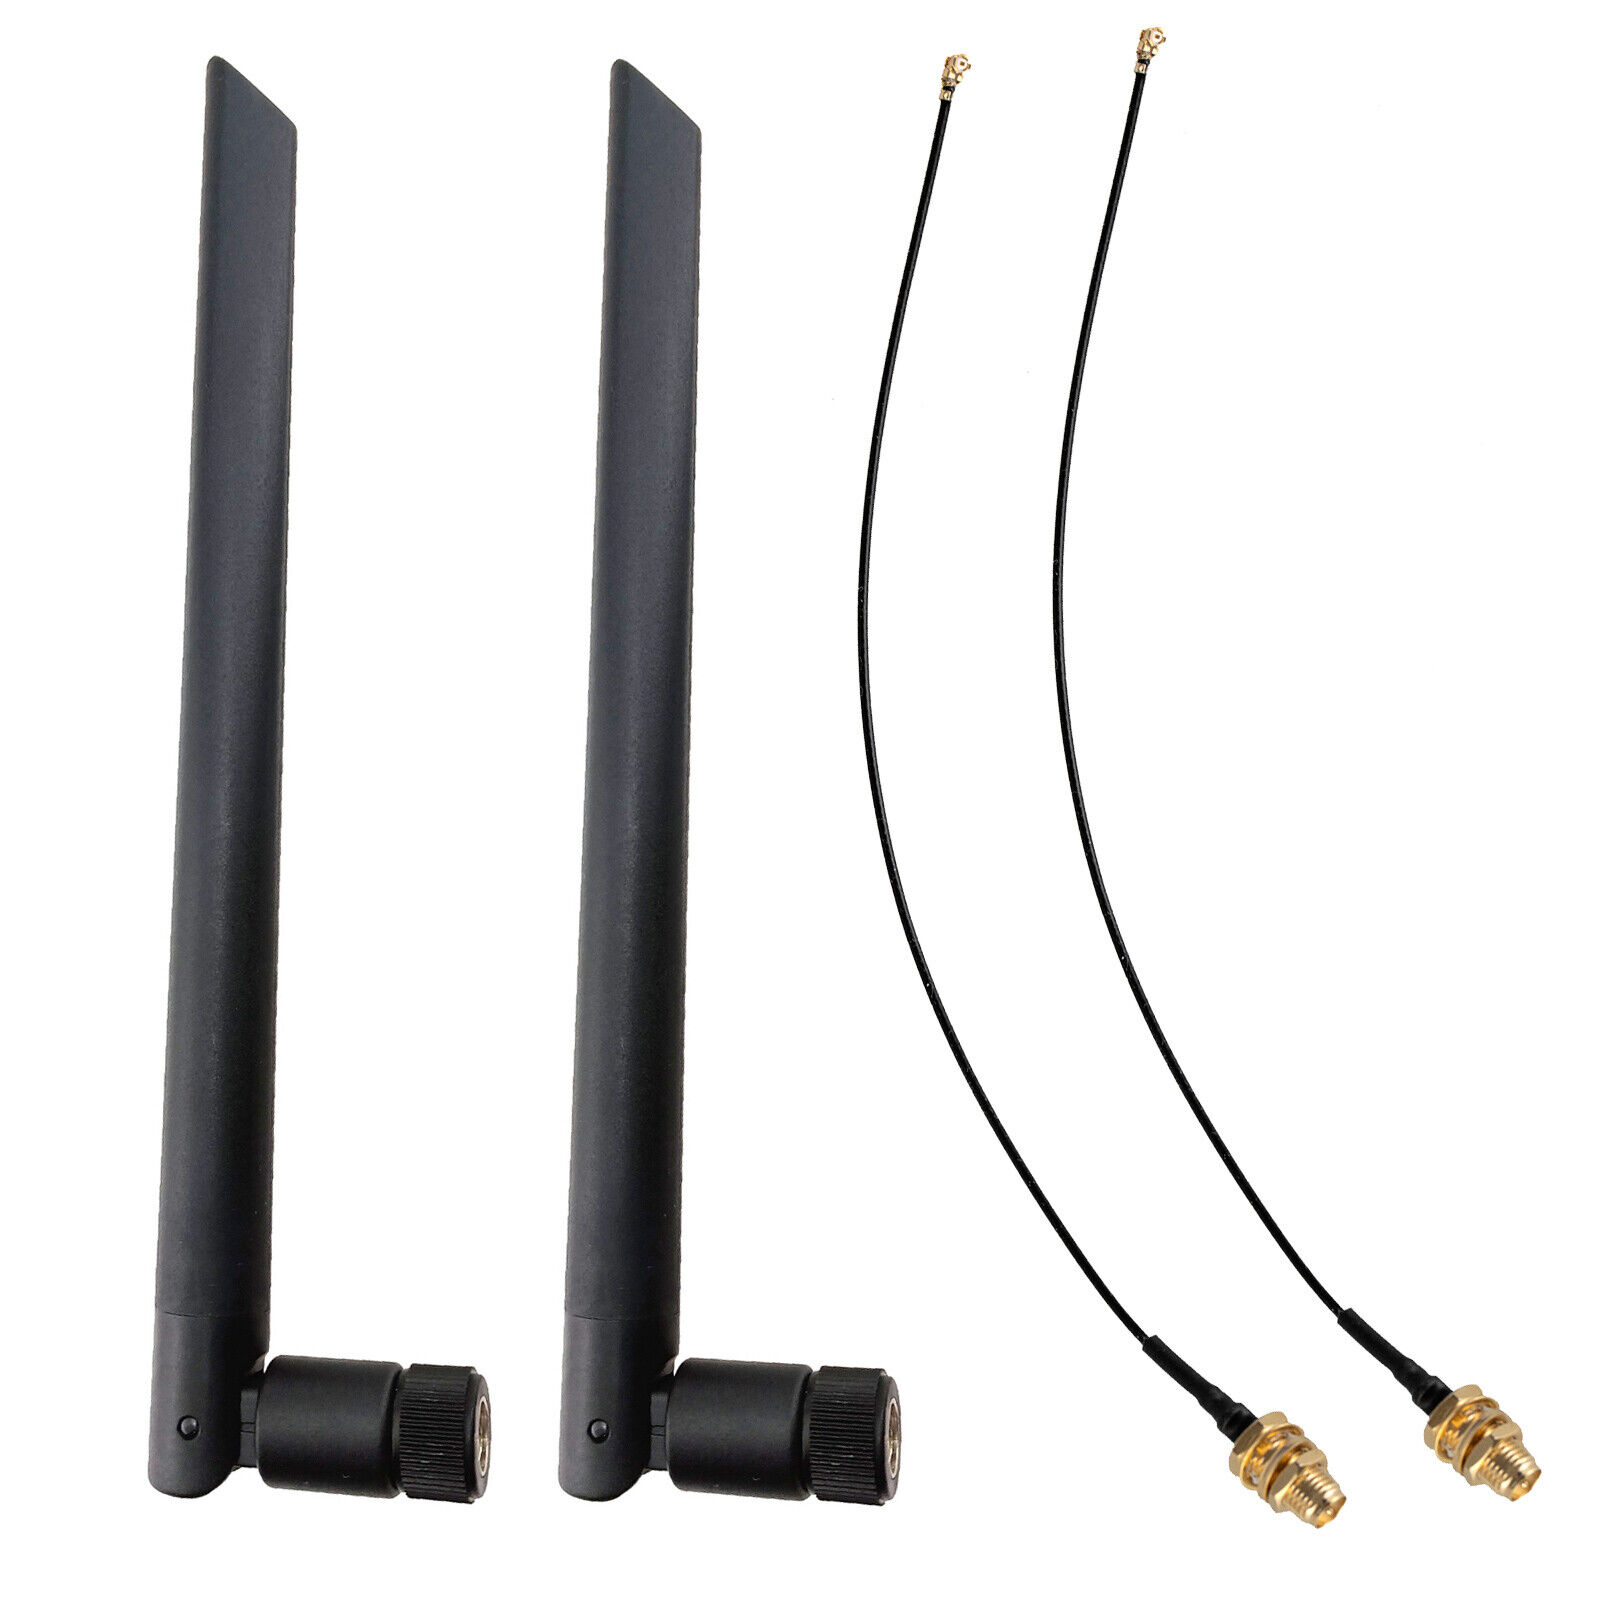 PCI-e IPEX RP-SMA Cable 6dBi External Wireless Antenna for PC AC WiFi Bluetooth